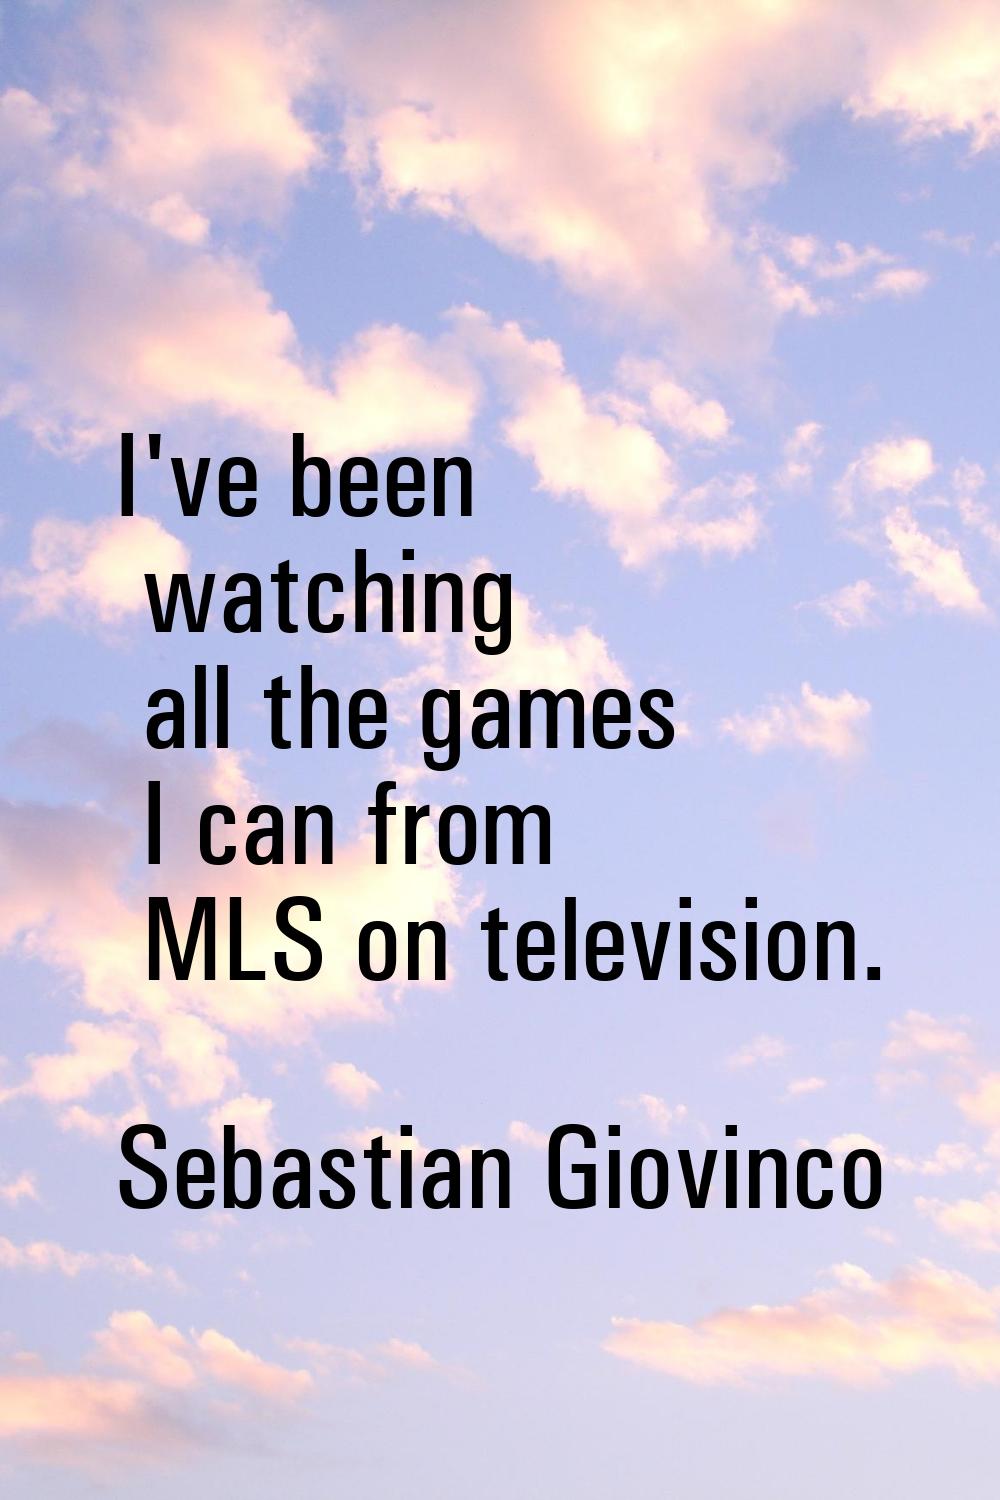 I've been watching all the games I can from MLS on television.